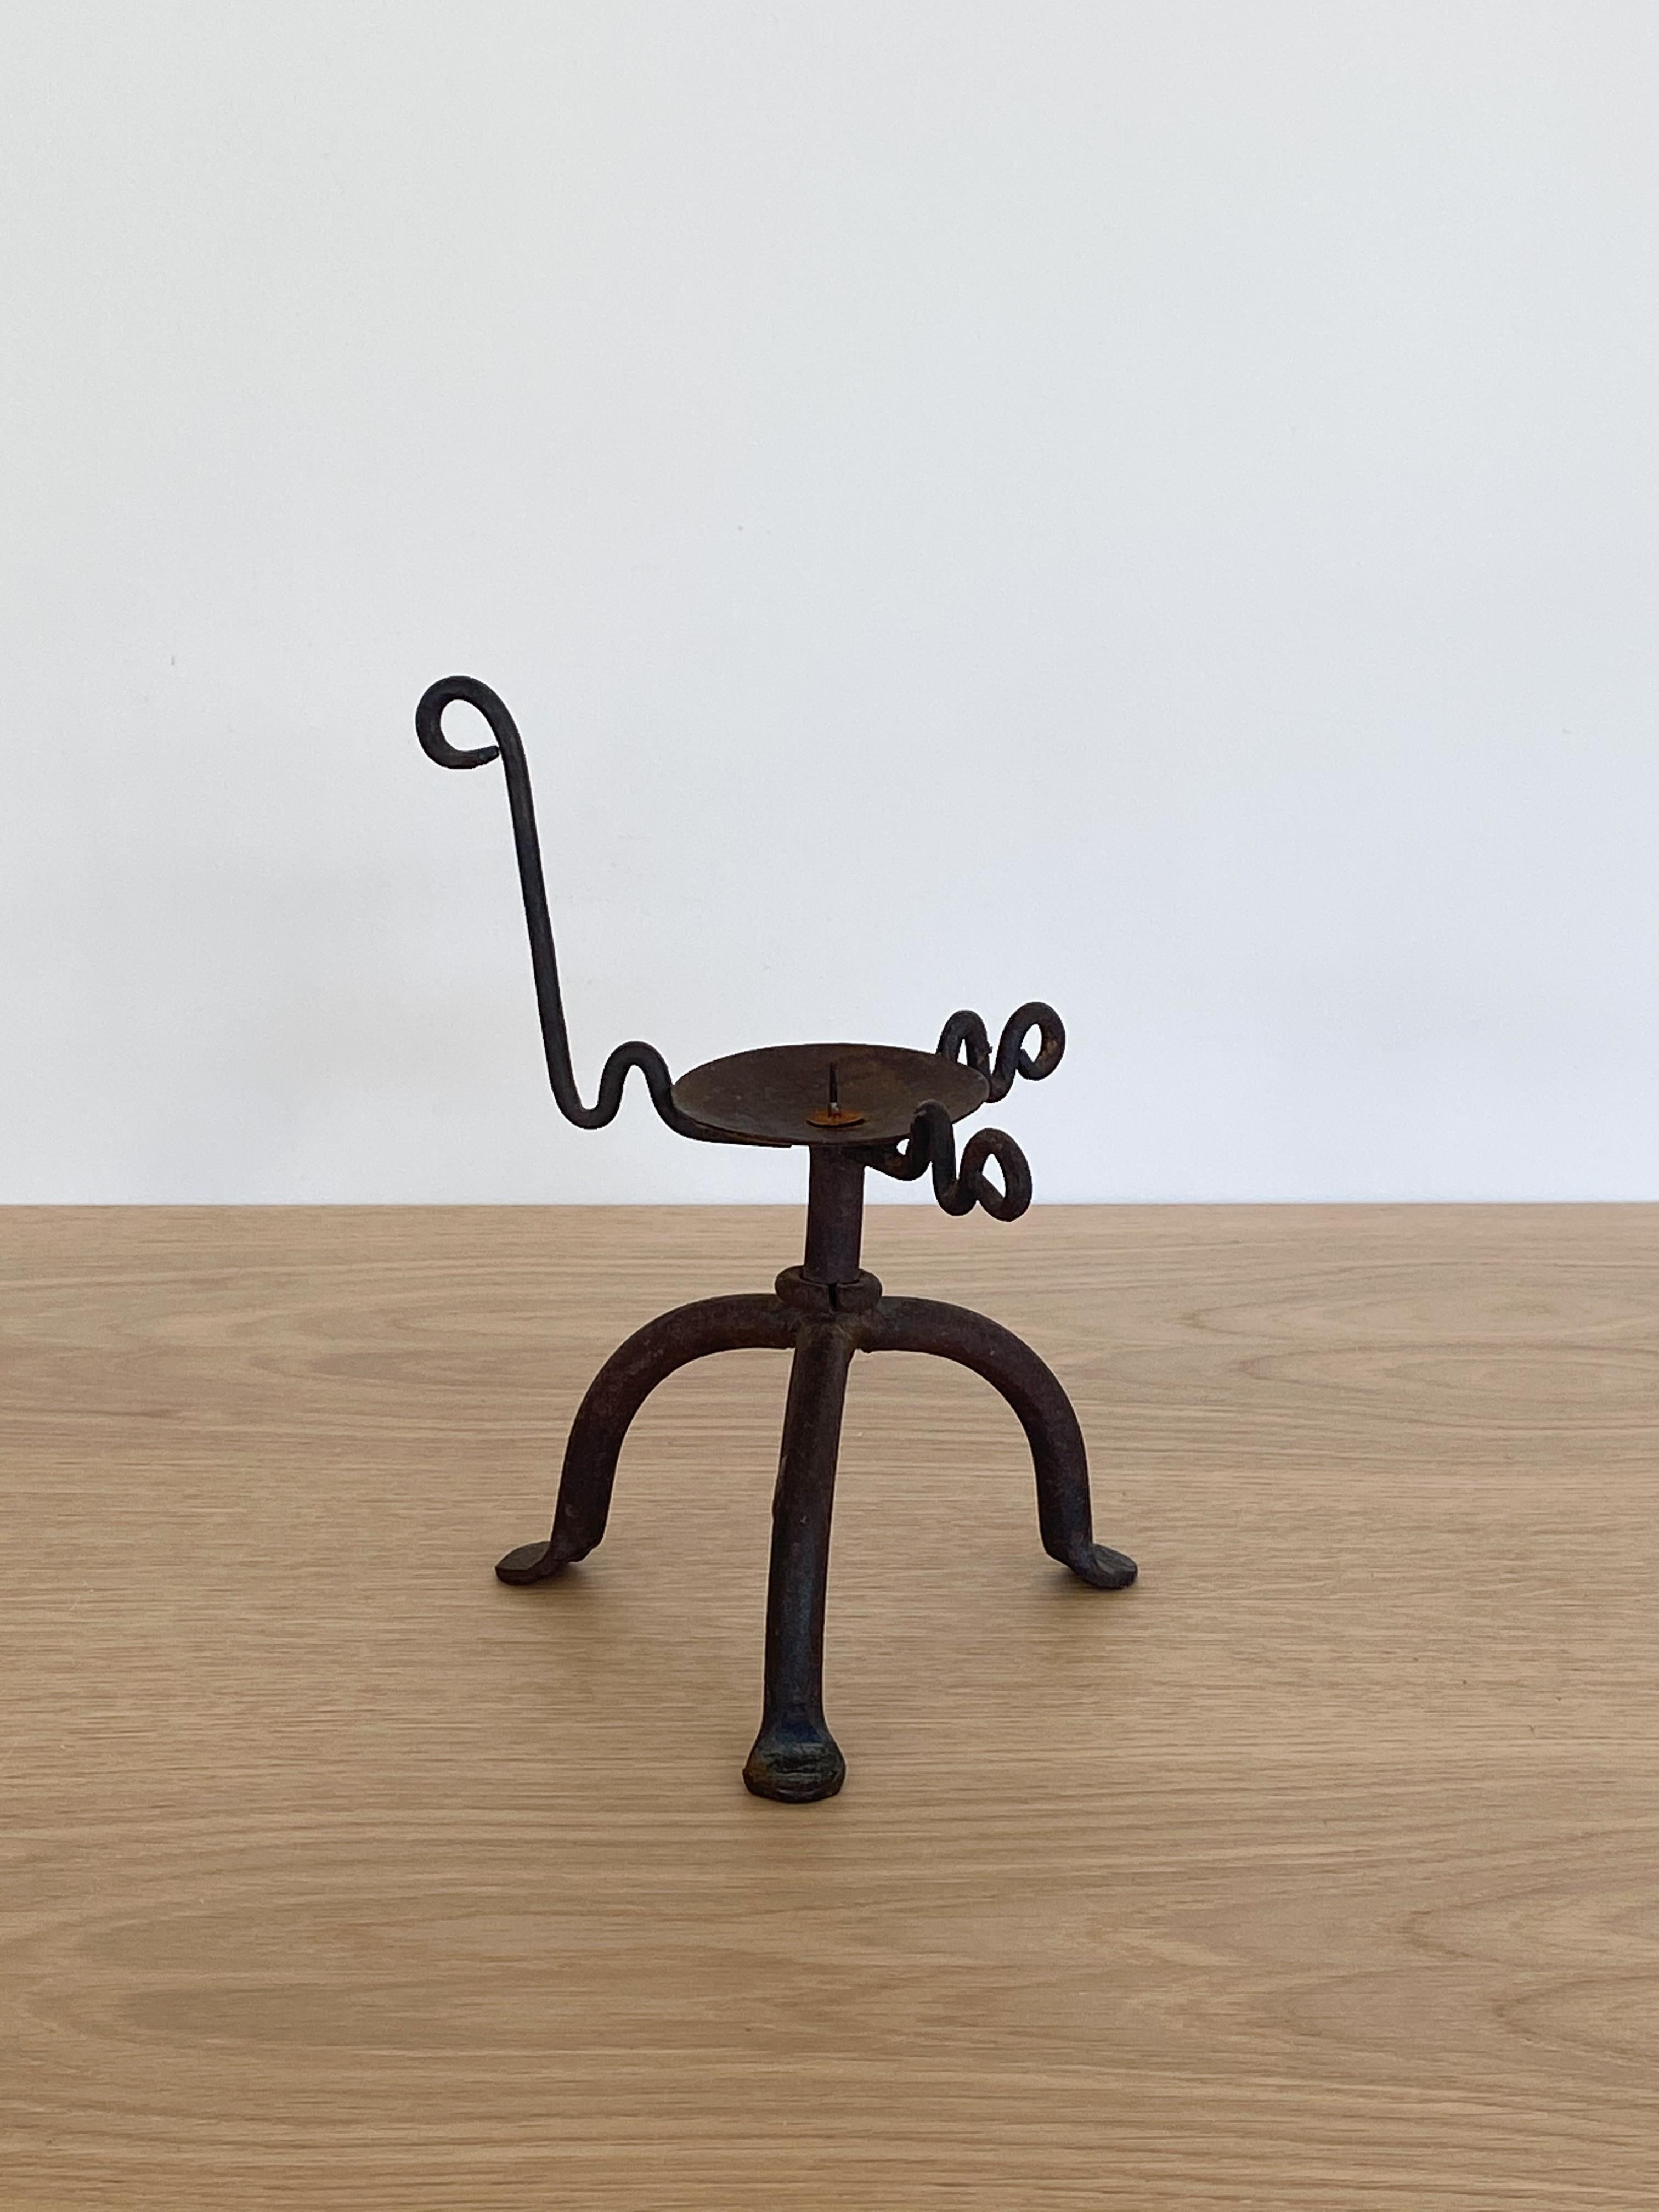 Vintage black iron candlestick holder with 3 squiggly arms and tripod legs. Original finish shows patina and rust.